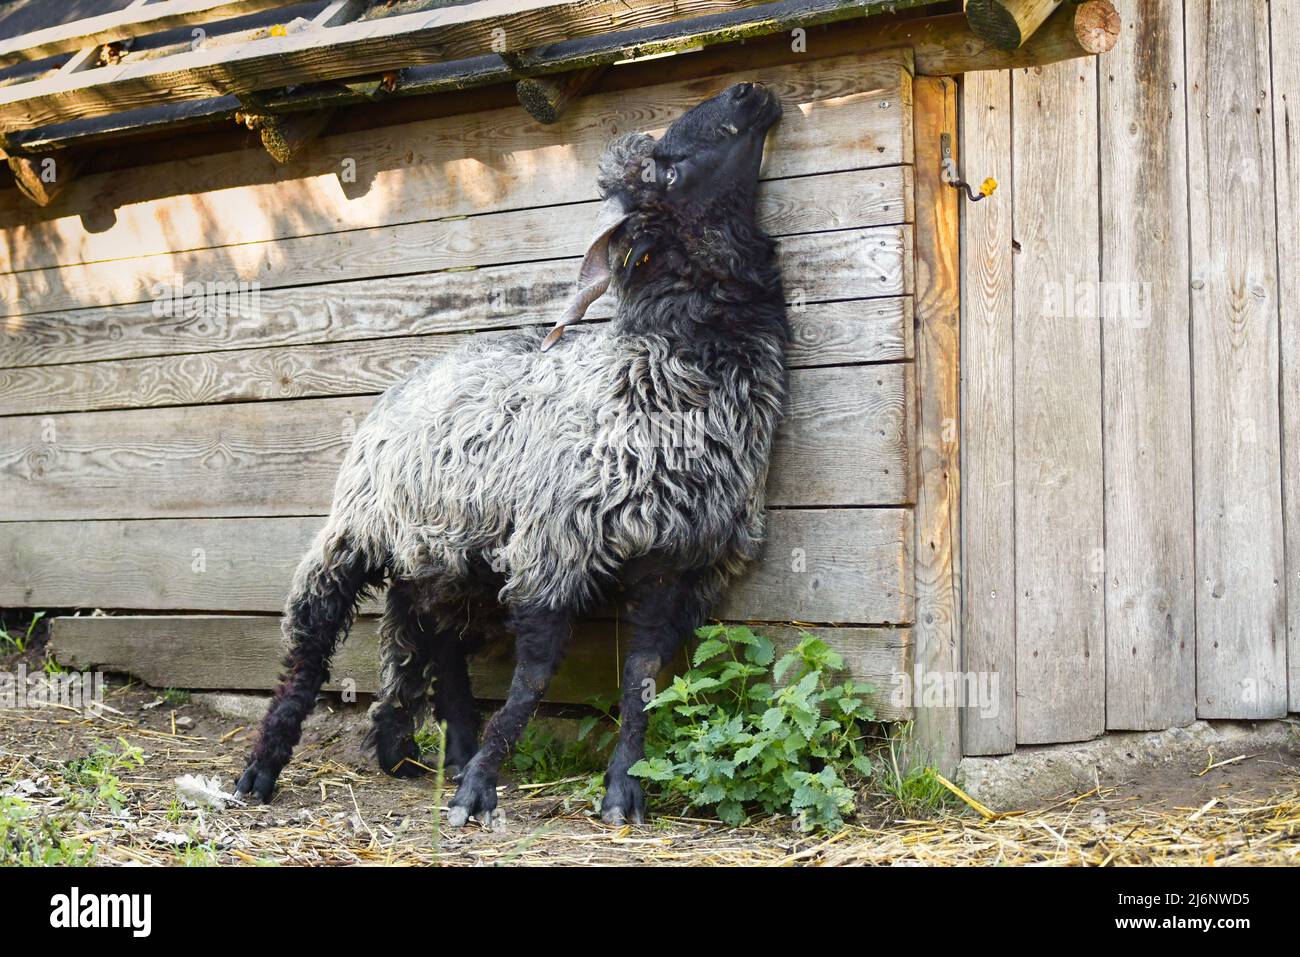 A male black Hortobagy Racka sheep (Ovis aries strepsiceros Hungaricus) with long spiral shaped horns scratching itself with its horns at the barn. Stock Photo